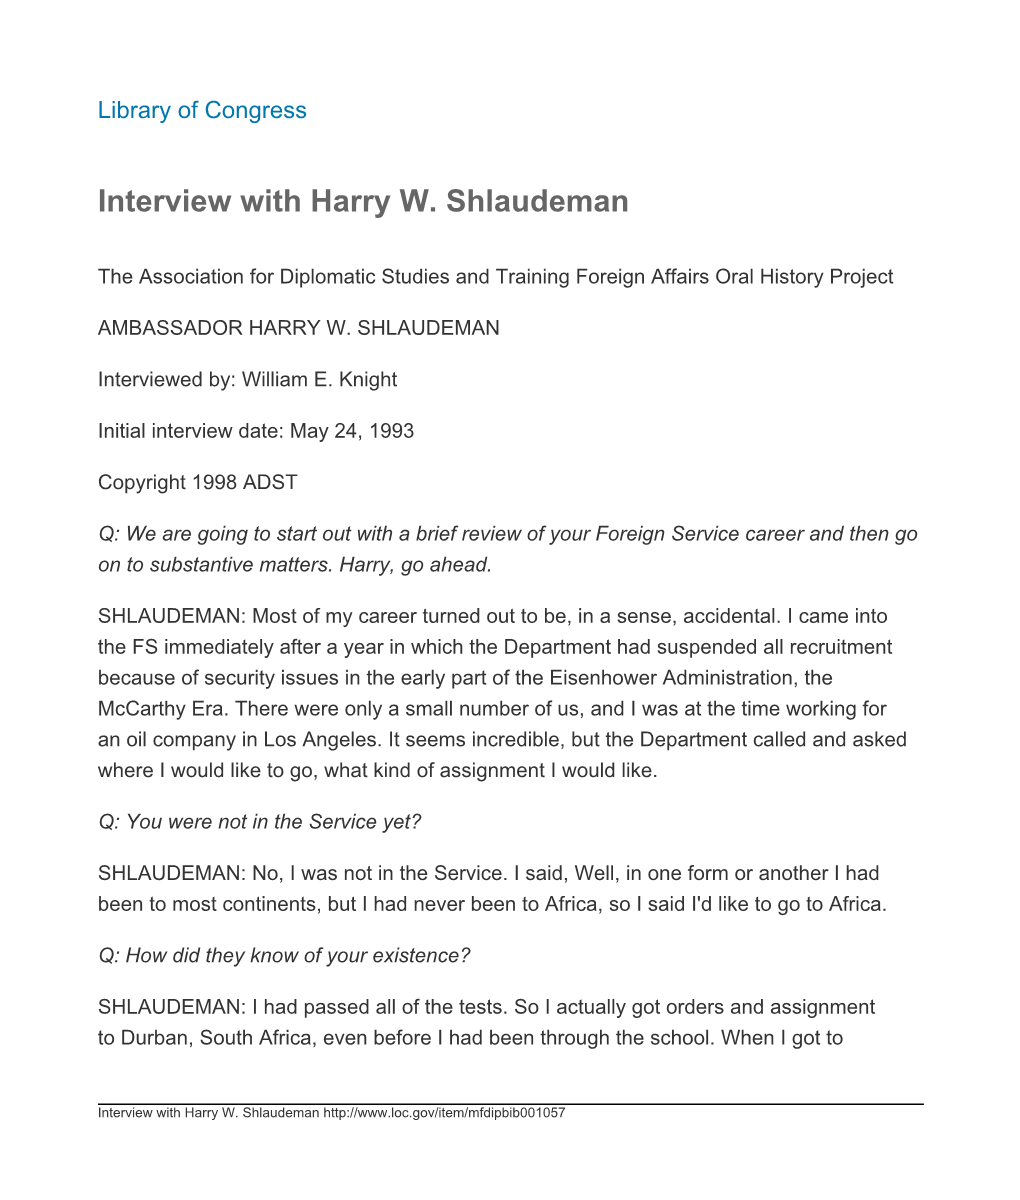 Interview with Harry W. Shlaudeman